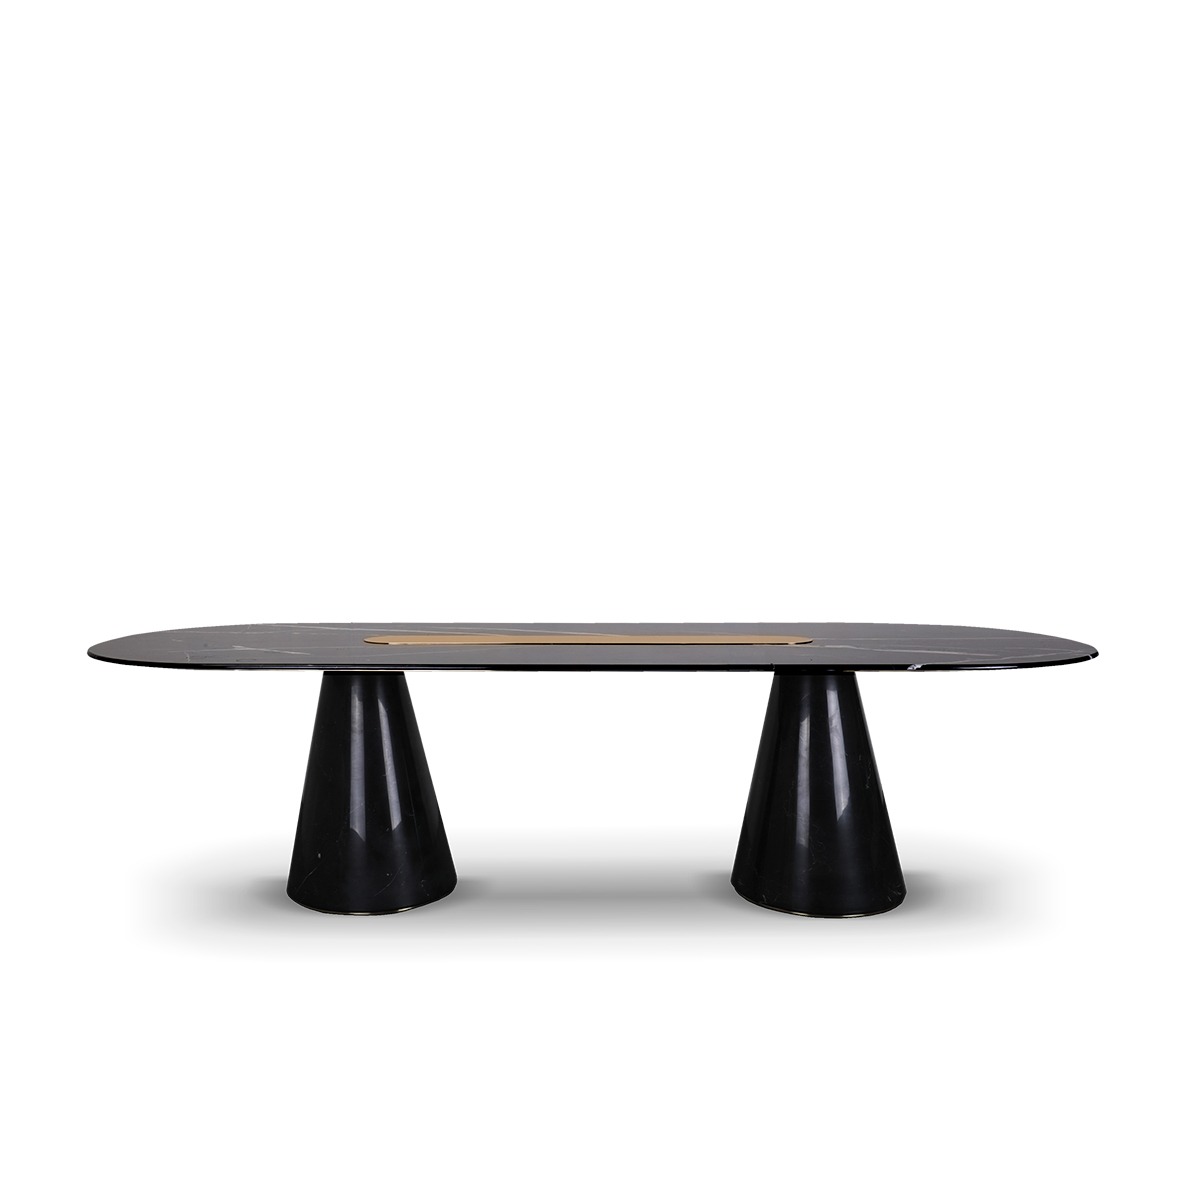 EH bertoia oval table 01 Pietra Round Dining Table